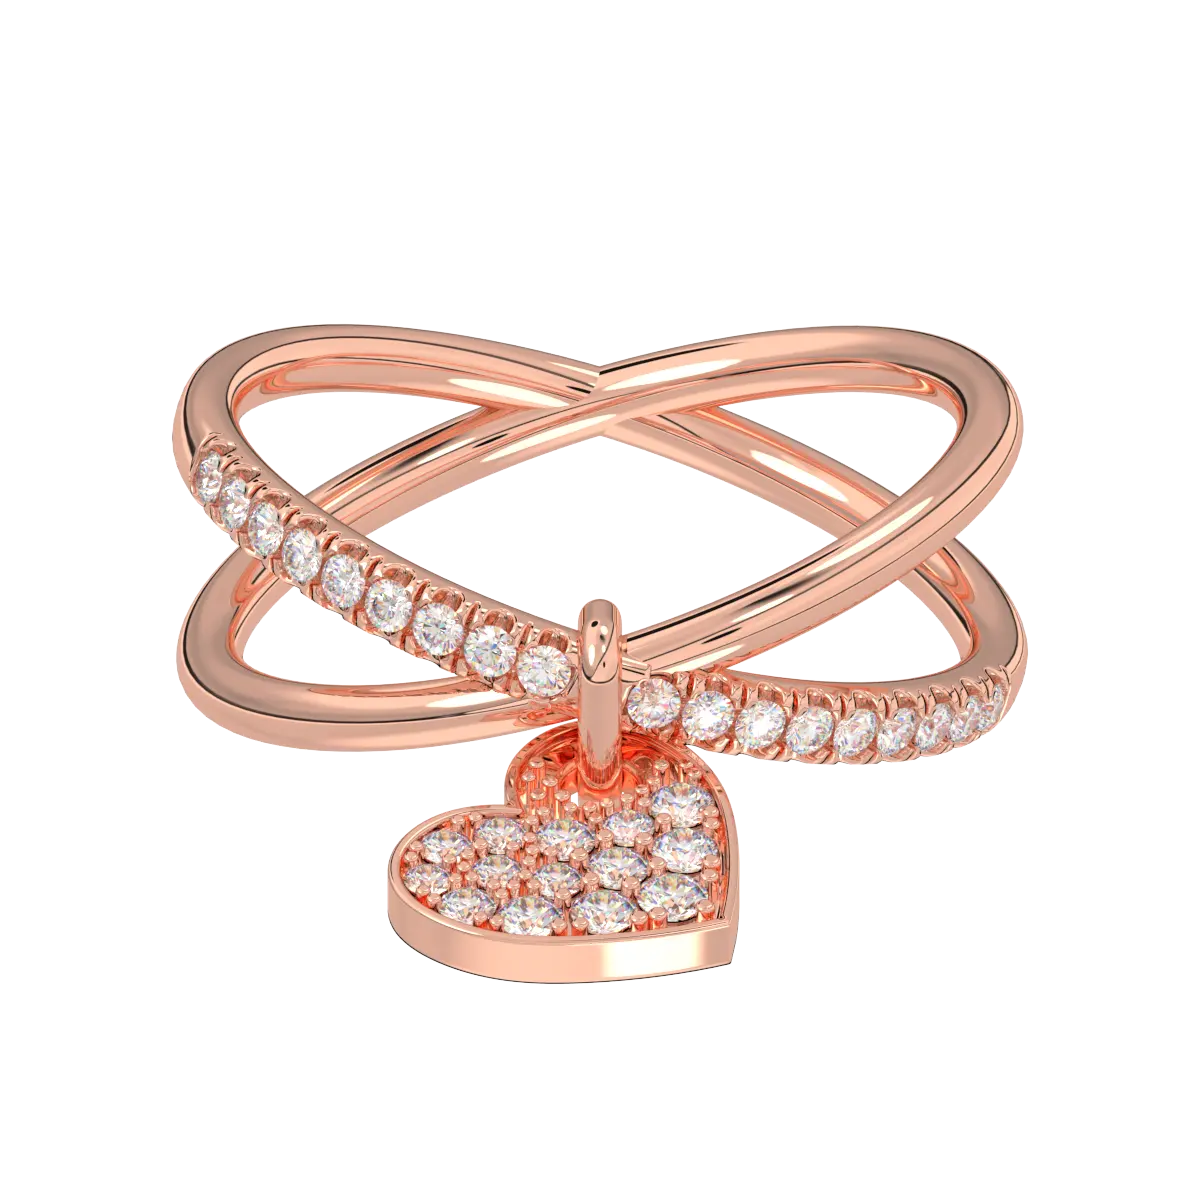 Fine Jewelry Knot Ring Heart Shaped Sterling Silver 925 Rose Gold Plated Cubic Zirconia Stone Round Brilliant Cut Vietnam